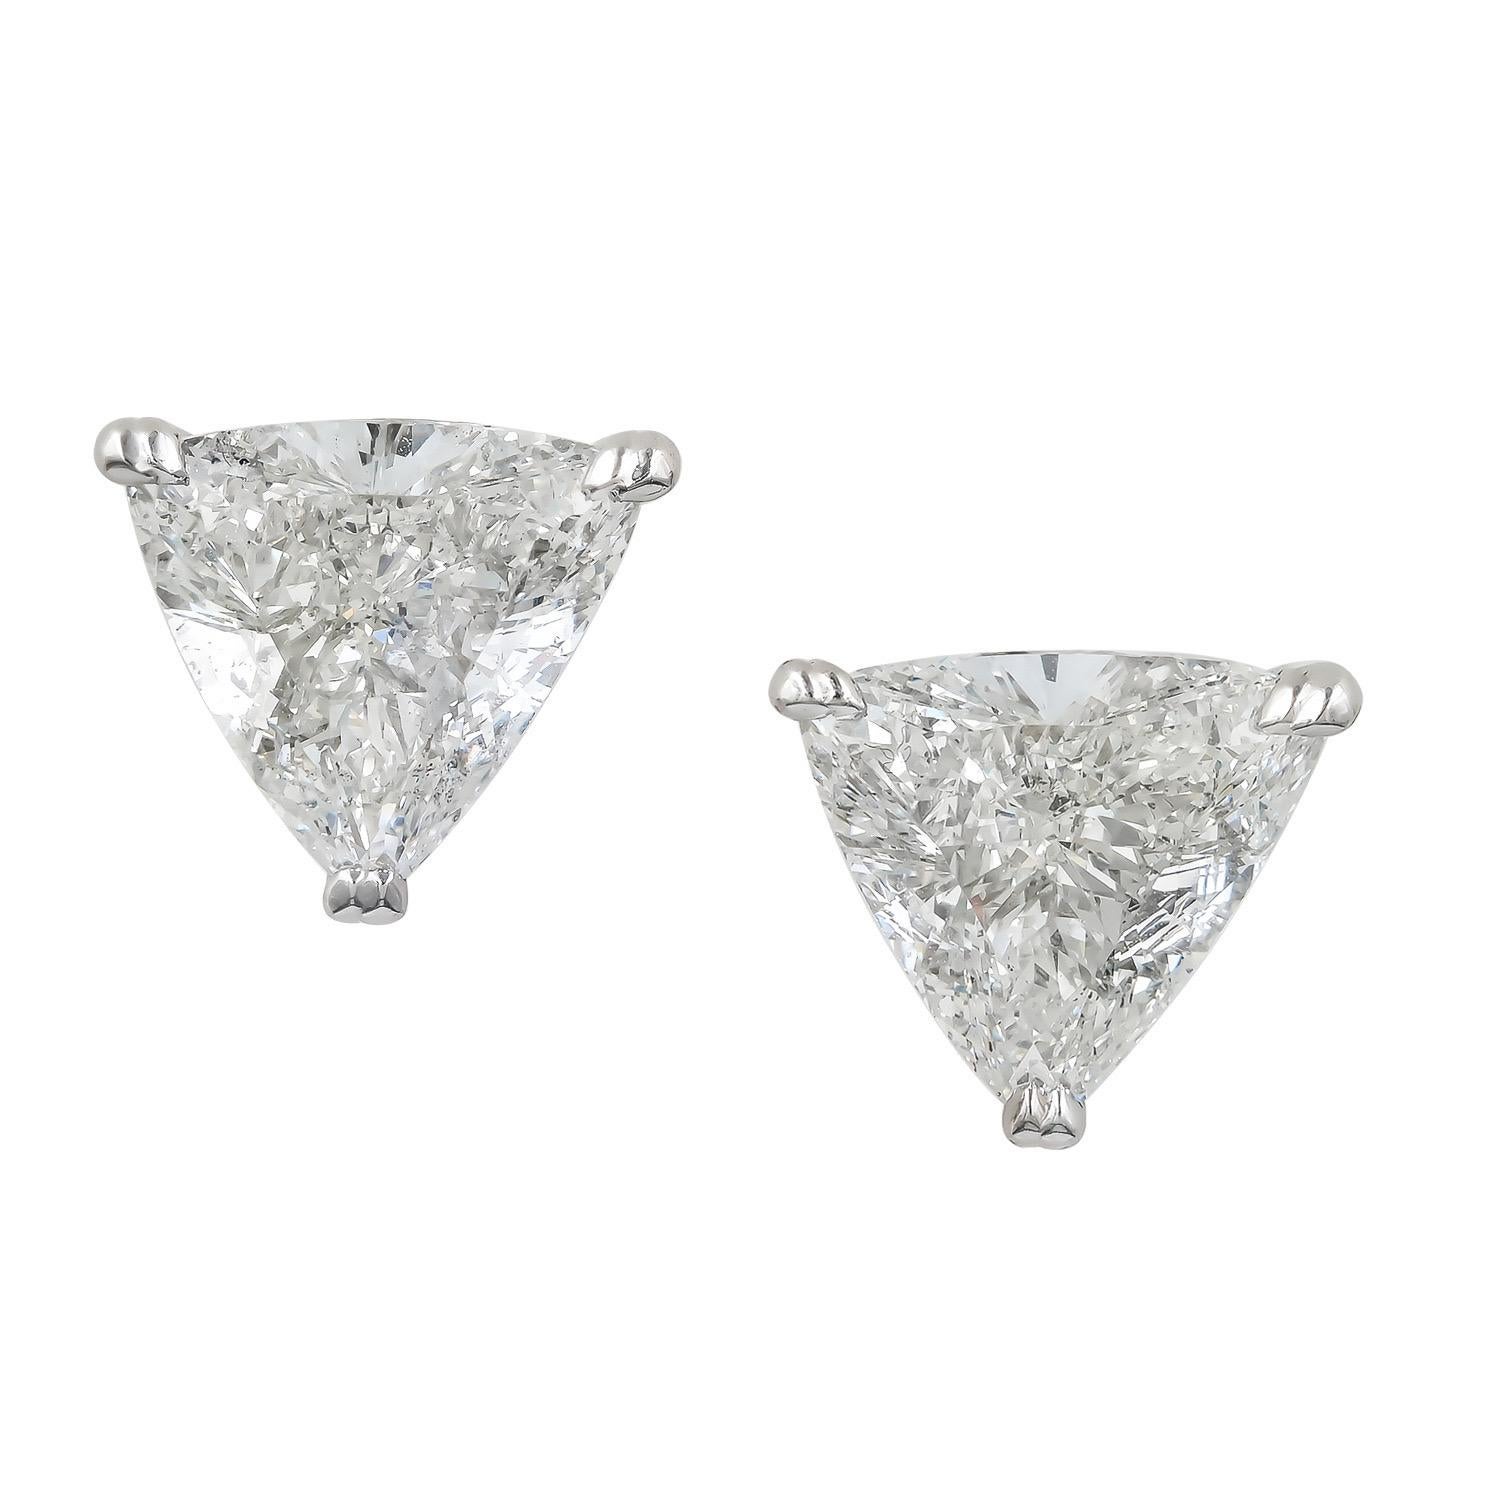 Diamond stud earrings.

Say NO to boring typical round diamond studs!
Shine your OWN way.
Amazing pair of very high quality triangle cut 
Diamonds perfectly matched as diamonds stud earrings.
With a total carat weight of almost SEVEN carats 
this